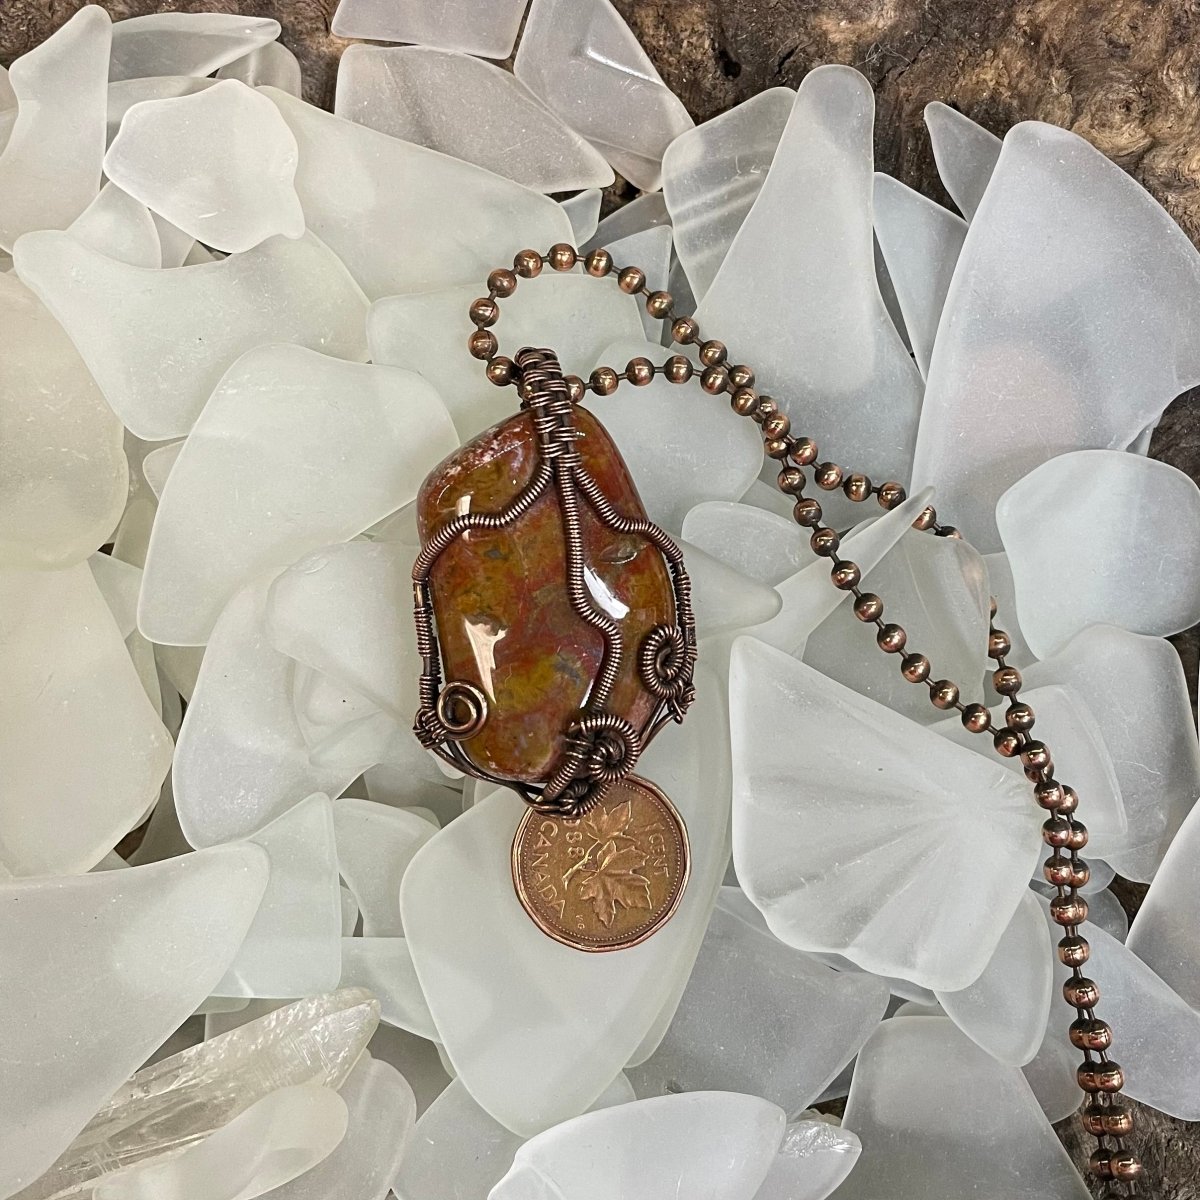 Bay of Fundy Agate Necklace - Mother Of Metal - Bay of Fundy Agate - Bay of Fundy Collection - Copper-